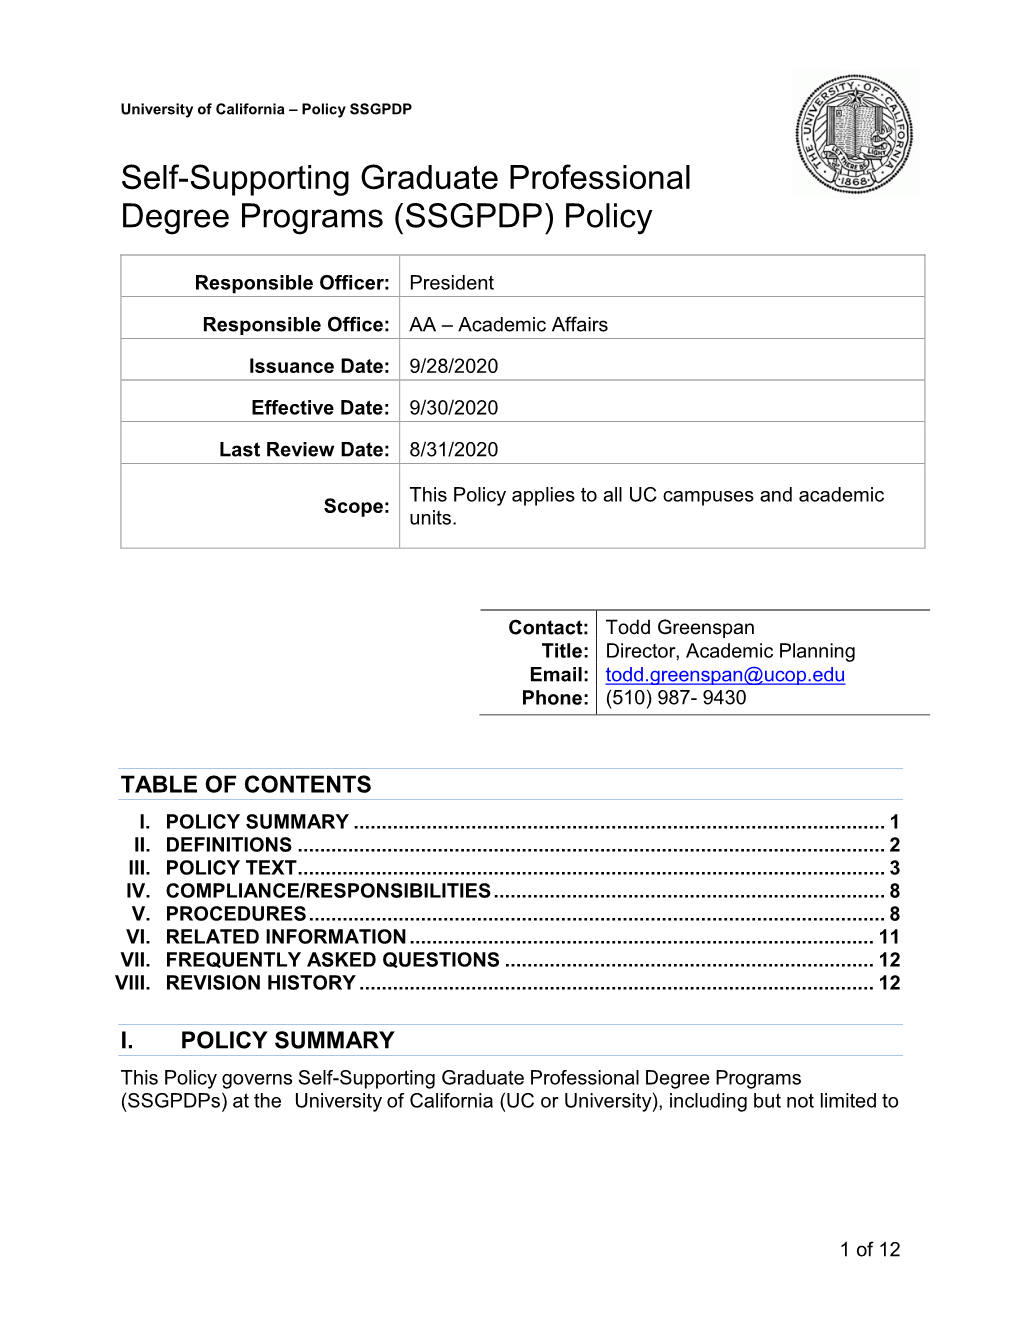 UC Self-Supporting Graduate Professional Degree Program Policy